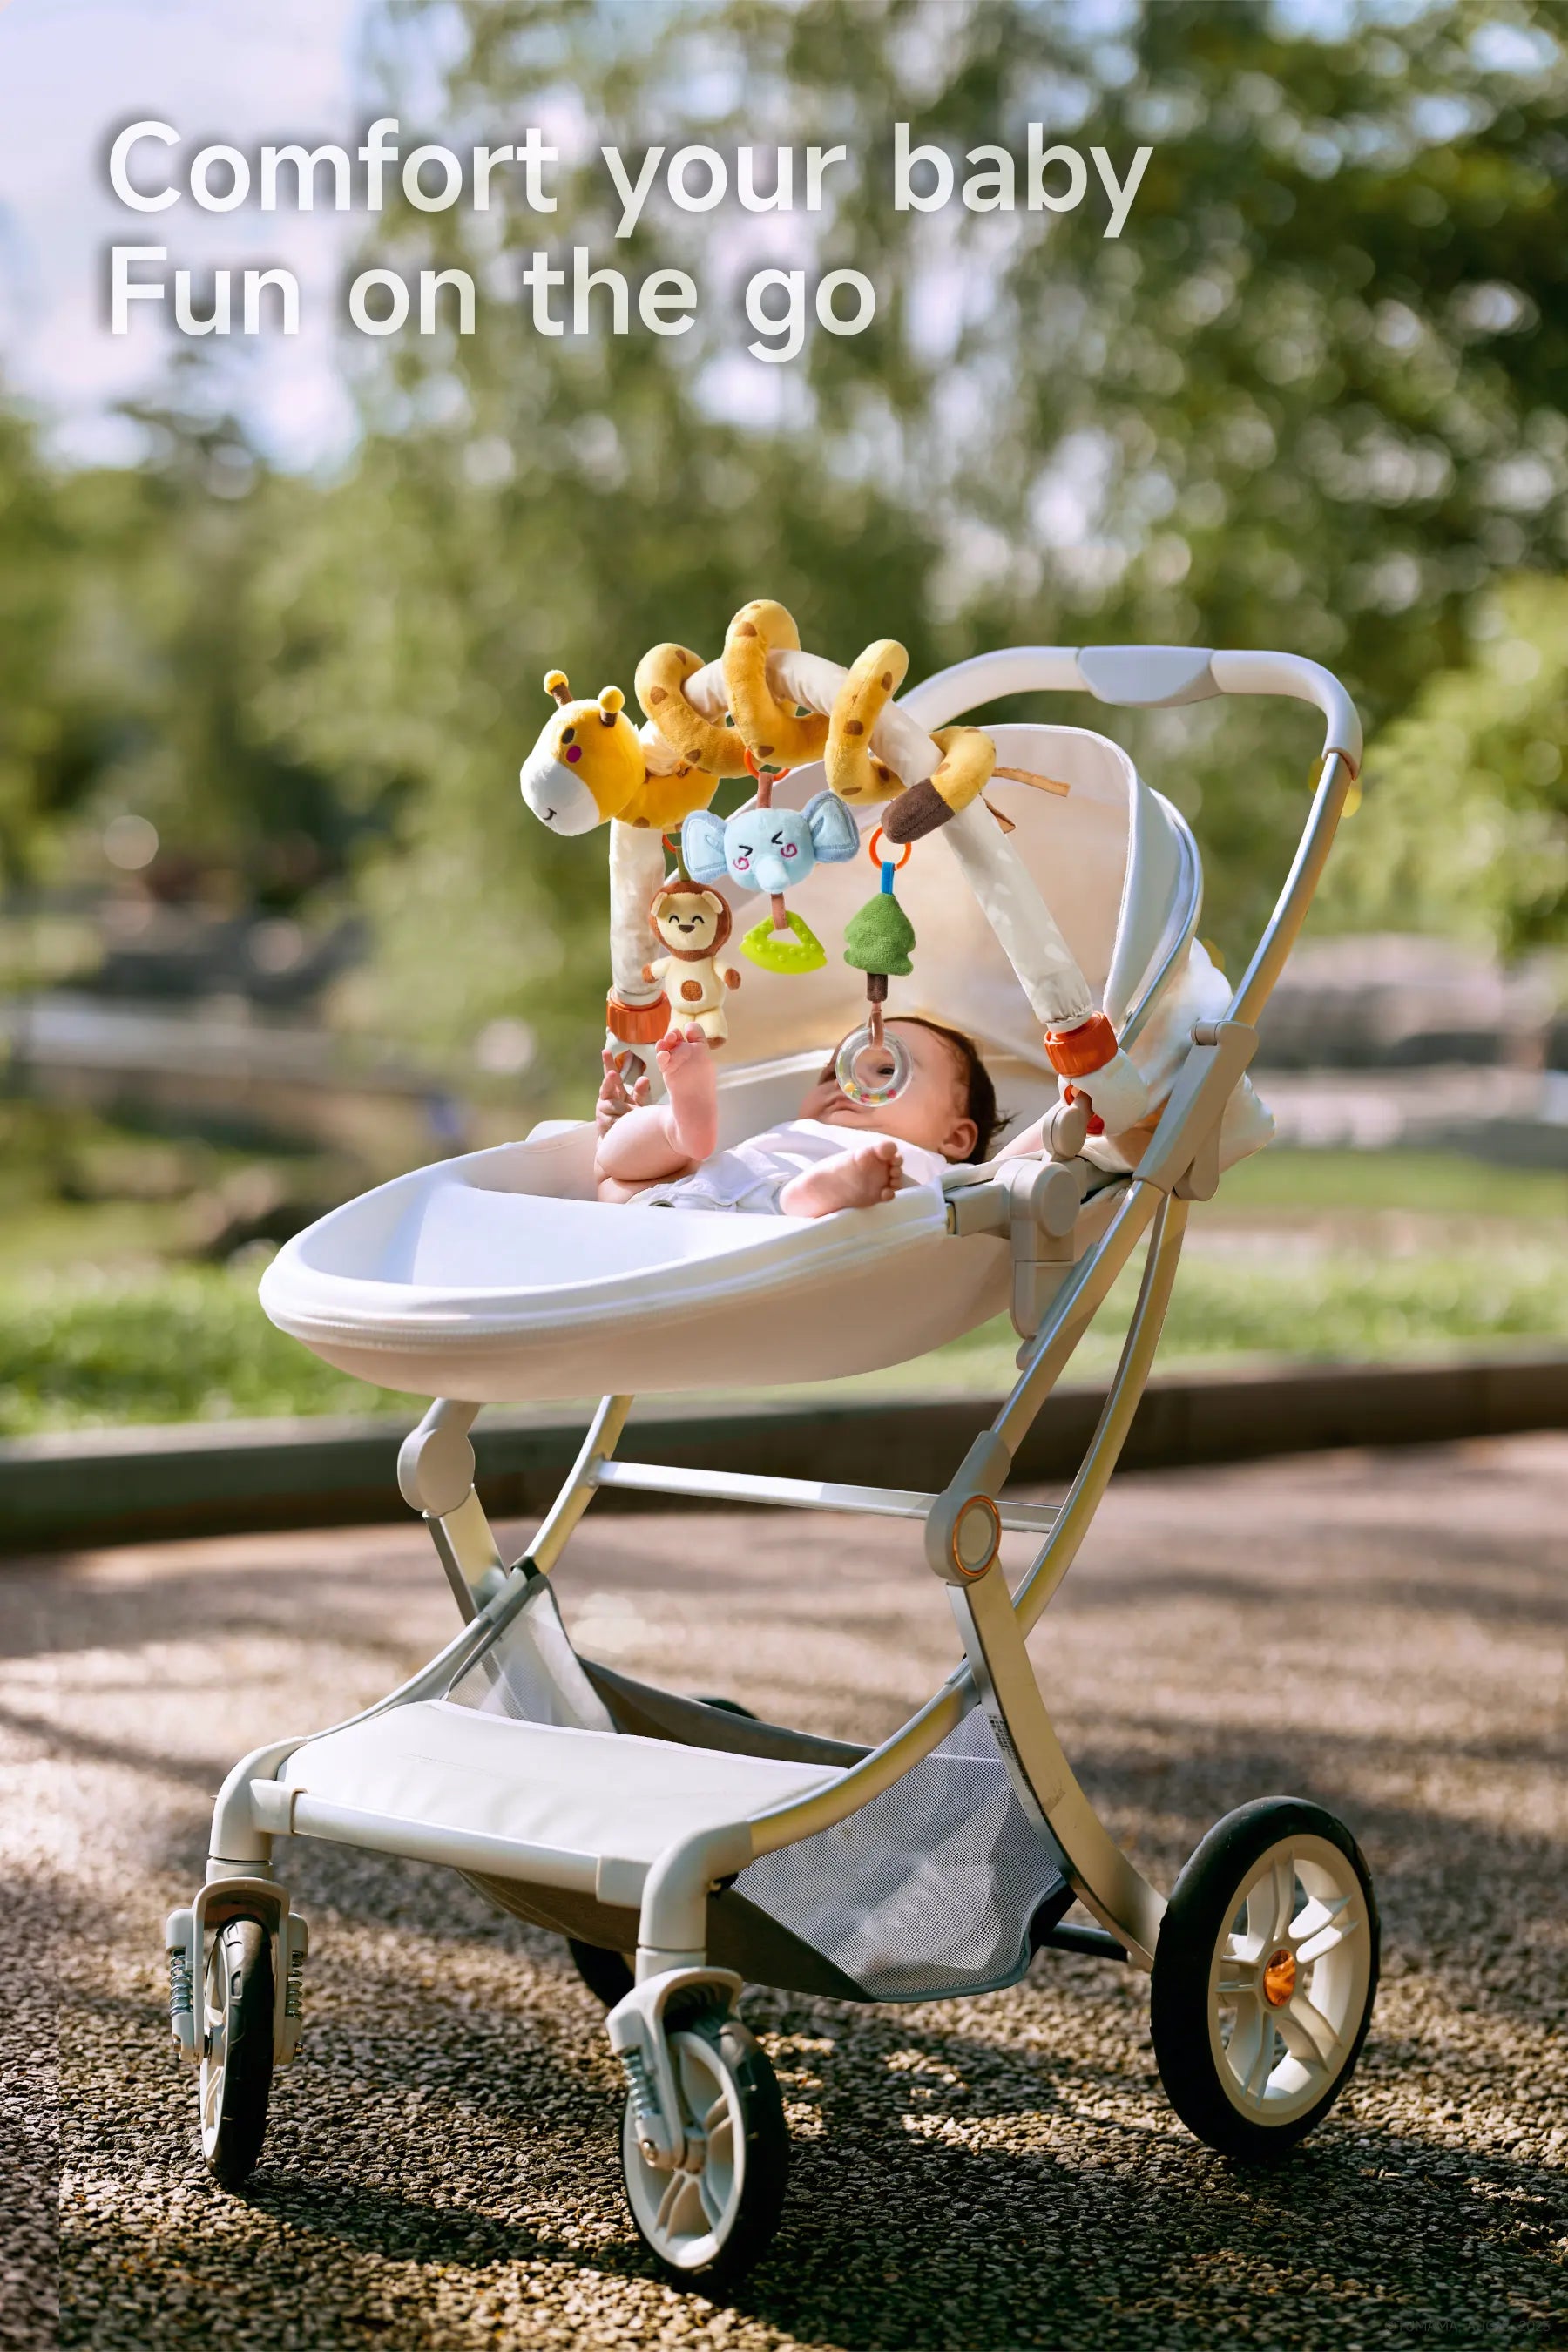 Stroller arch toy for babies with cute giraffe elephant lion